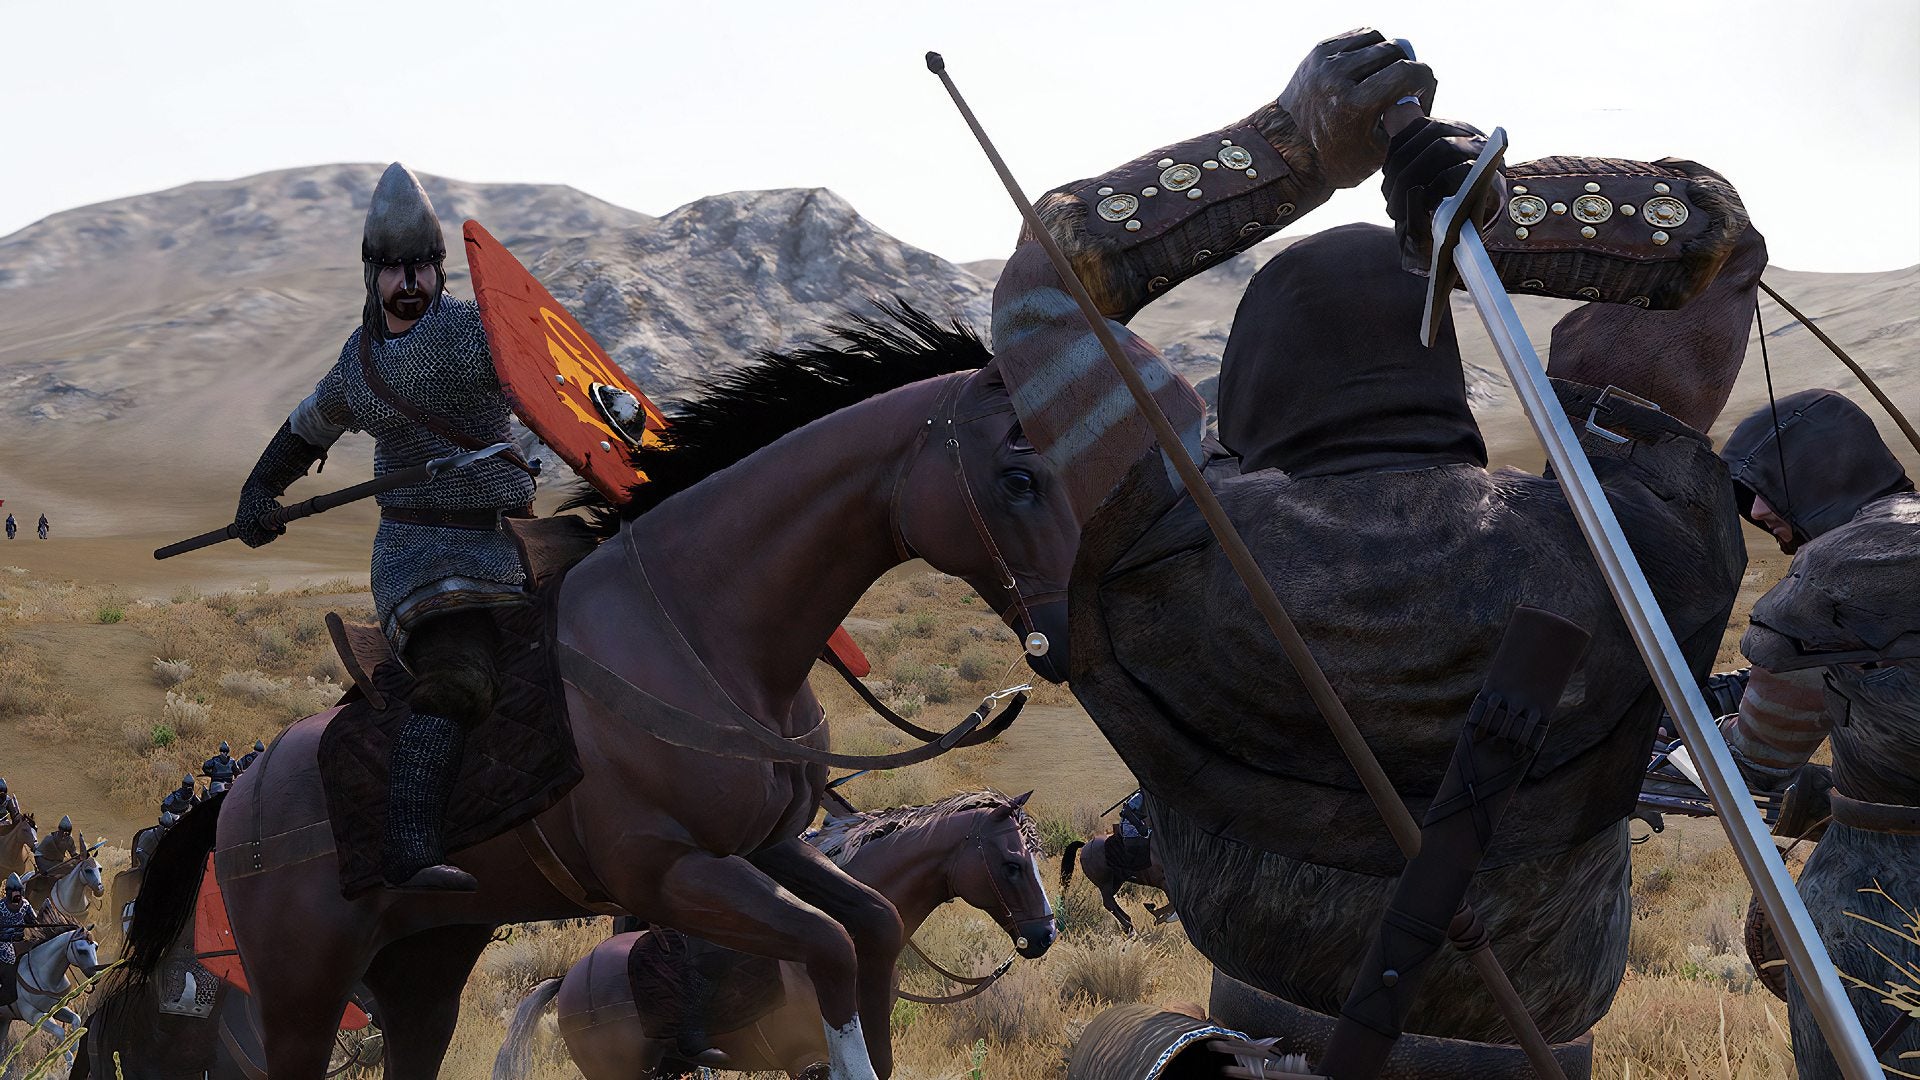 Image for Mount & Blade 2: Bannerlord charges out of Steam early access in October